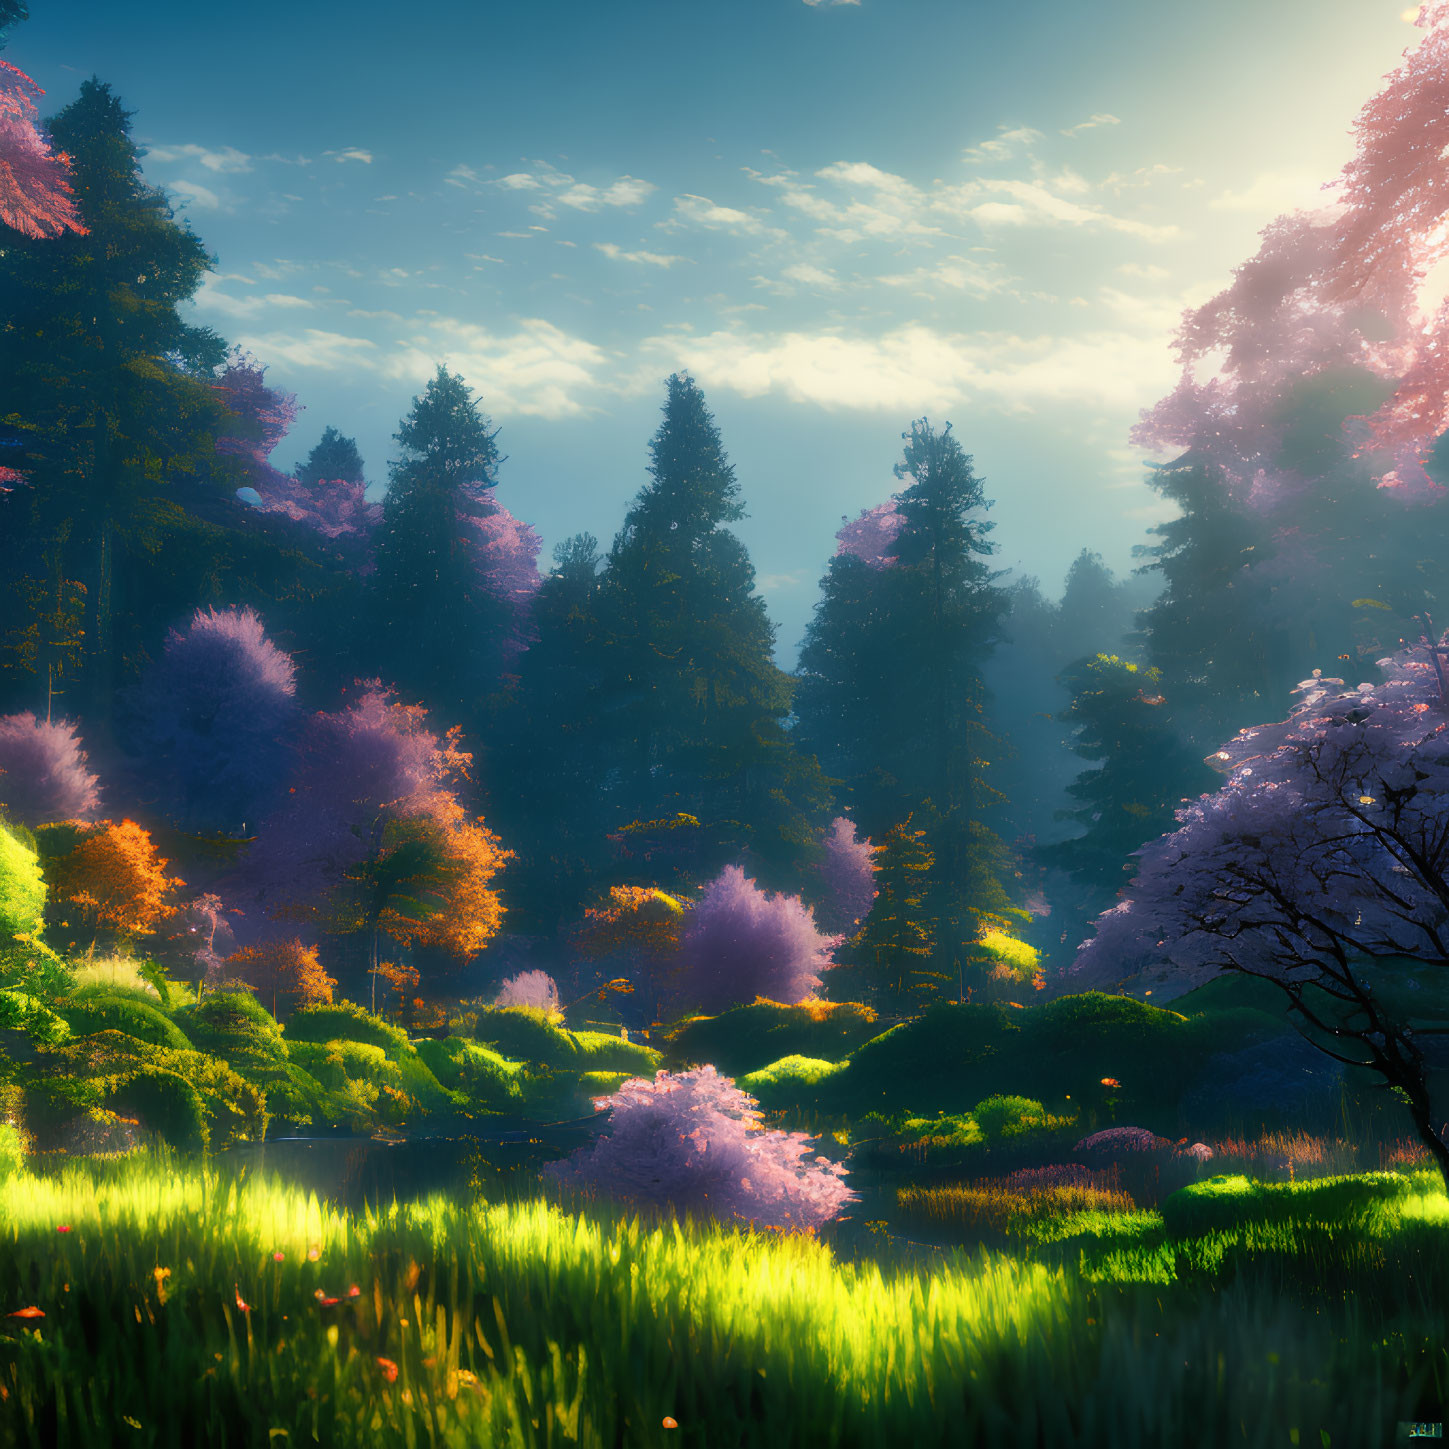 Tranquil forest clearing with colorful trees and cherry blossoms